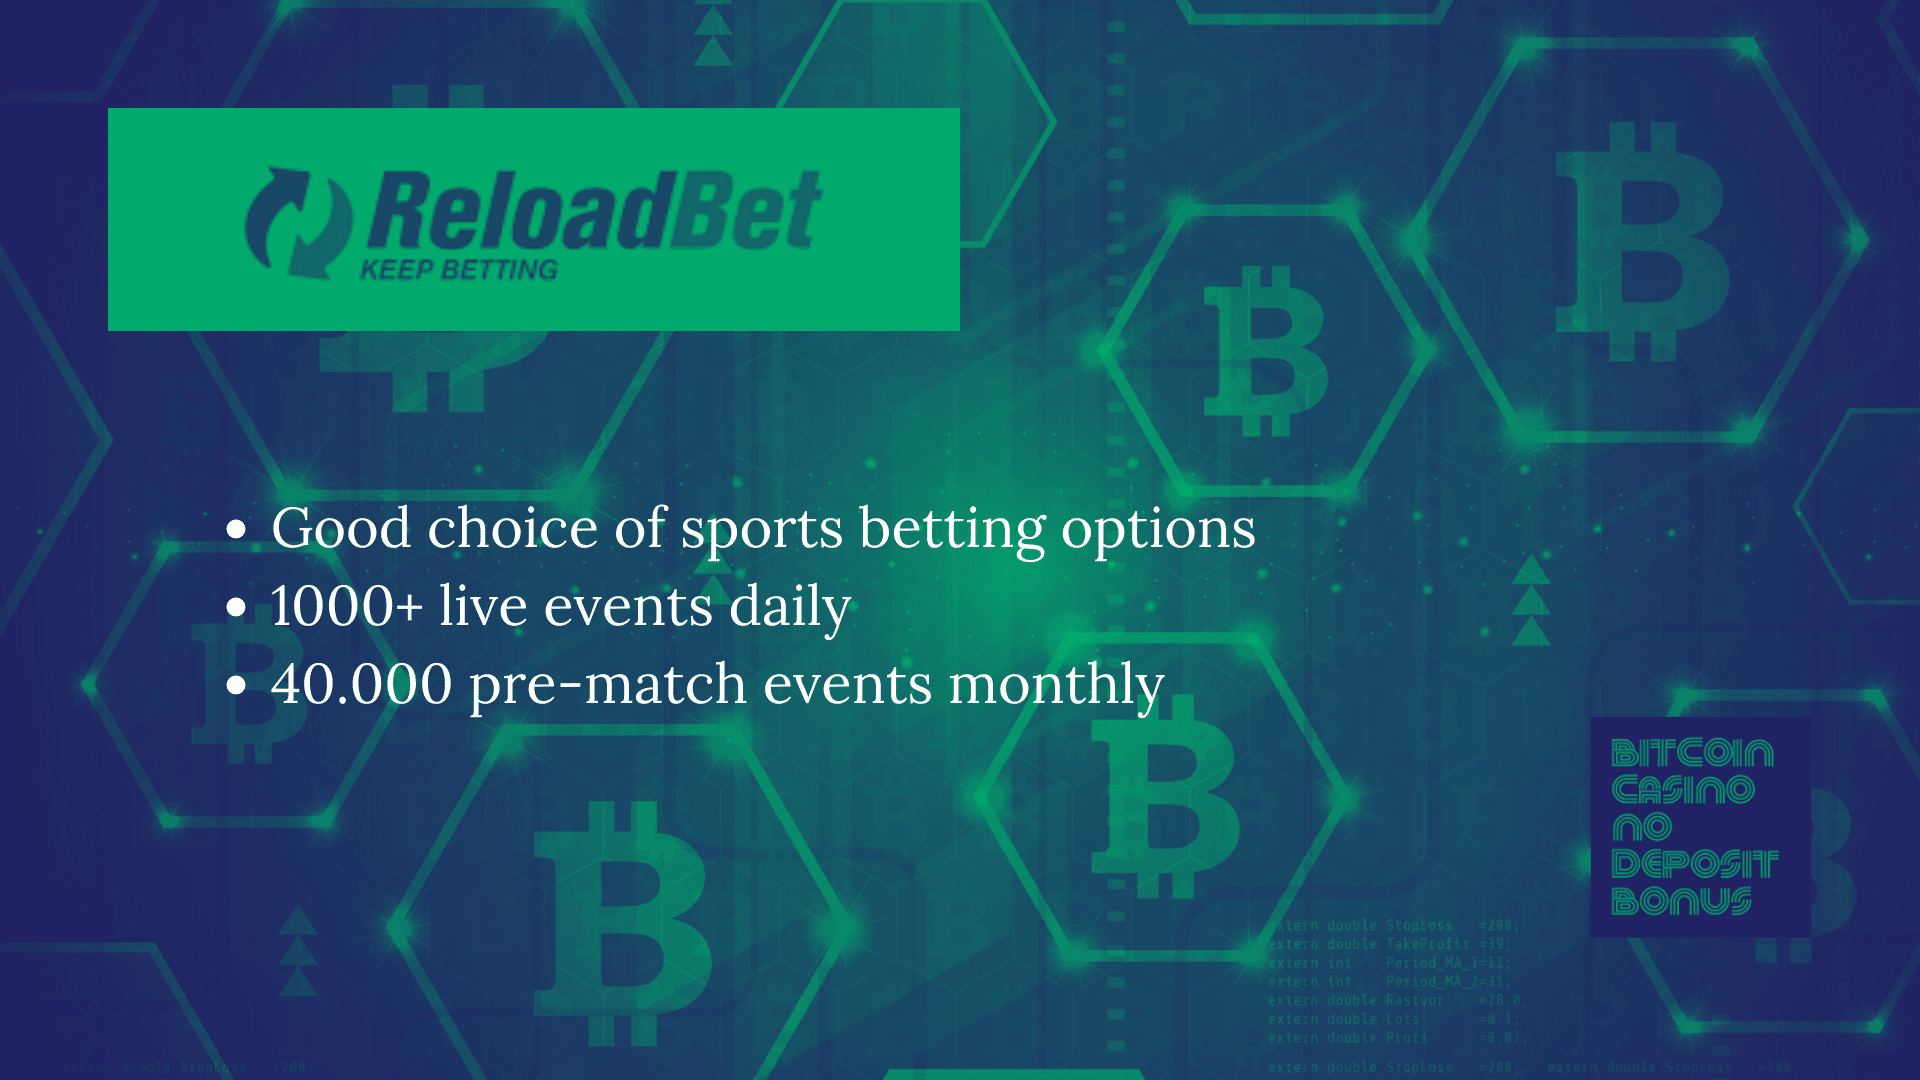 You are currently viewing ReloadBet Promo Codes – ReloadBet.com Free Coupons December 2022